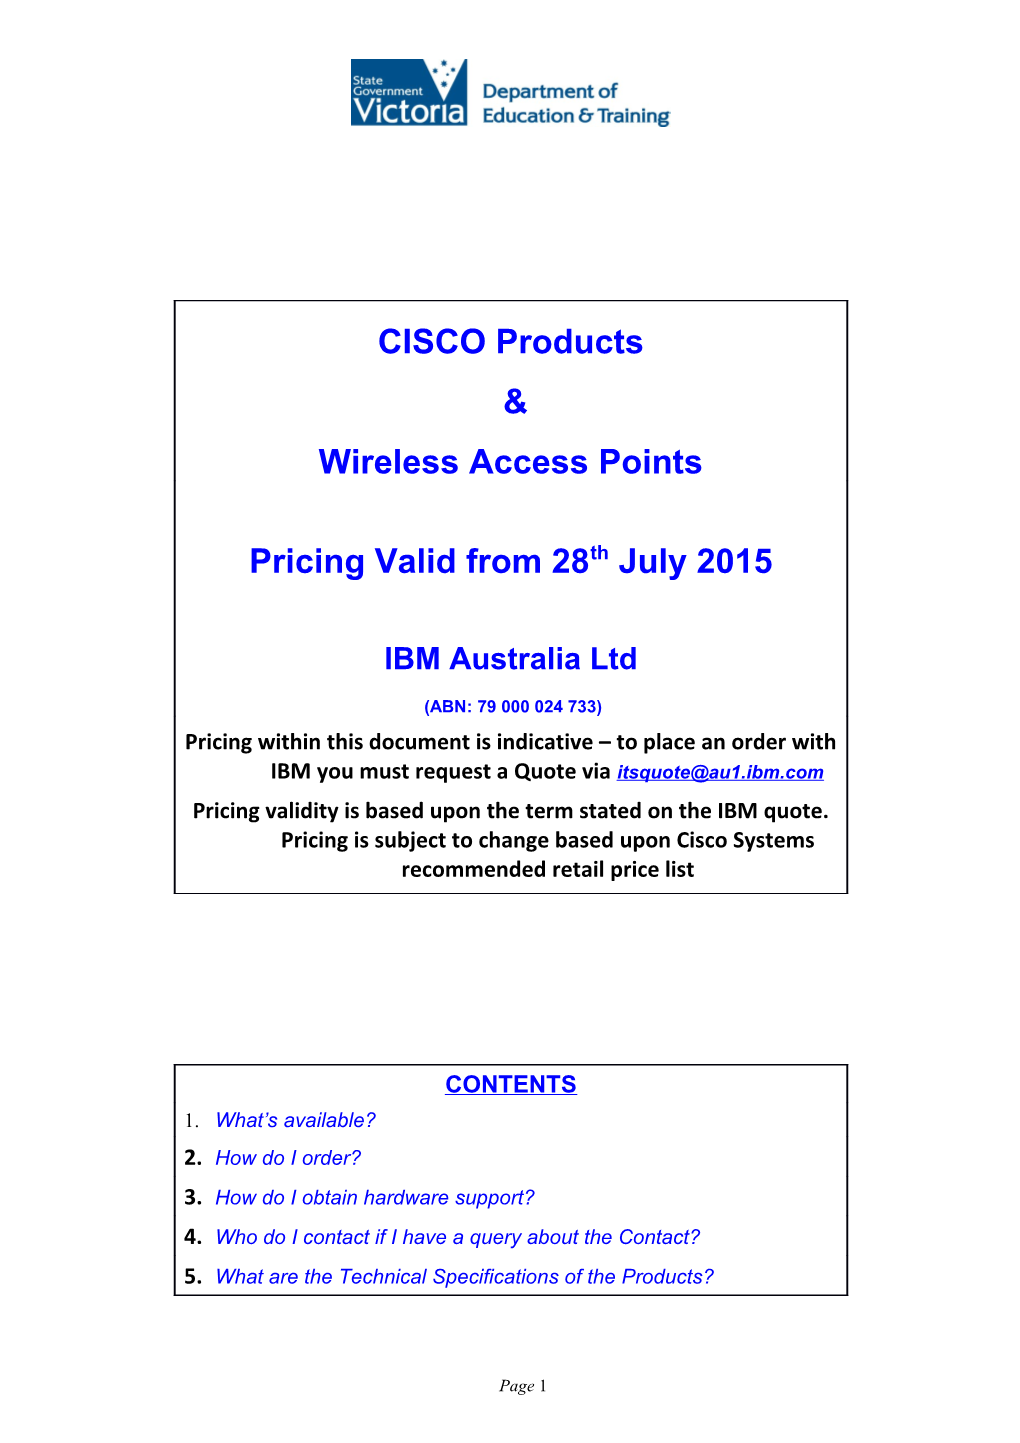 Cisco Products and Indicative Pricing